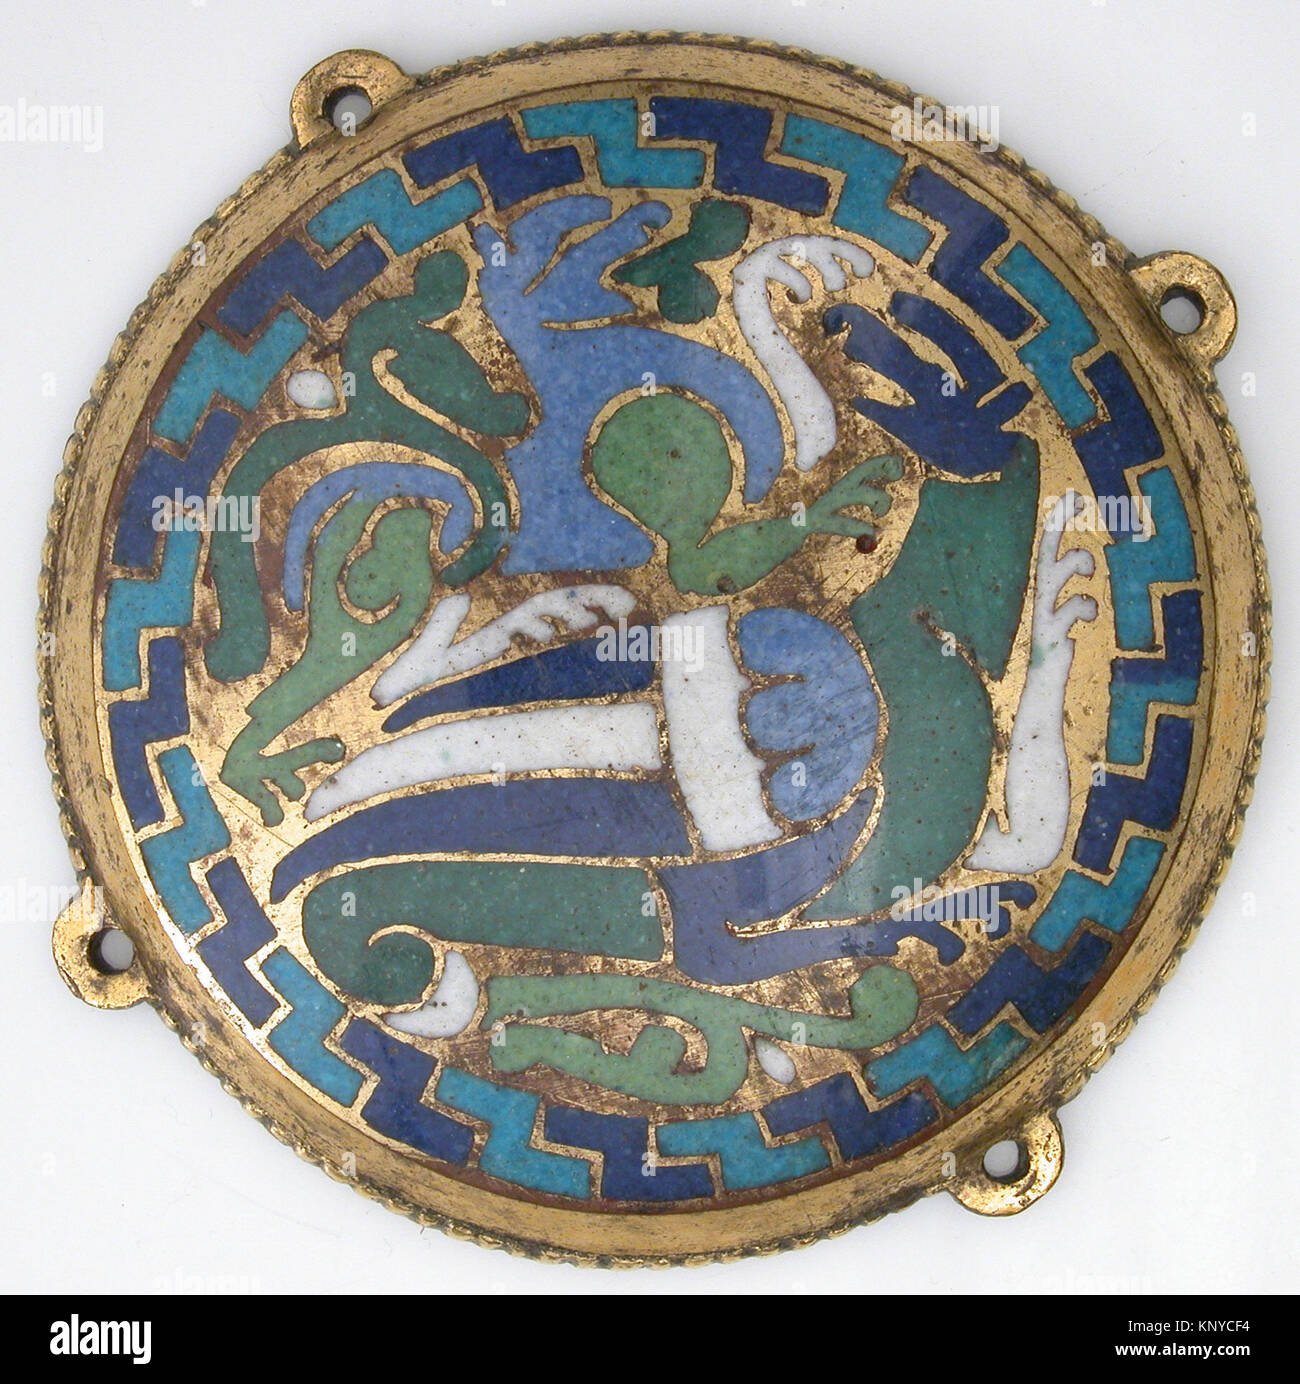 Combat Between Dragon and Dog (one of five medallions from a coffret) MET sf17-190-691s1 464564 French, Combat Between Dragon and Dog (one of five medallions from a coffret), ca. 1110?30, Copper-gilt, champlev? enamel, Overall: 3 9/16 x 1/2 in. (9 x 1.3 cm) Overall (with nail tangs): 3 7/8 x 1/2 in. (9.8 x 1.3 cm). The Metropolitan Museum of Art, New York. Gift of J. Pierpont Morgan, 1917 (17.190.691) Stock Photo